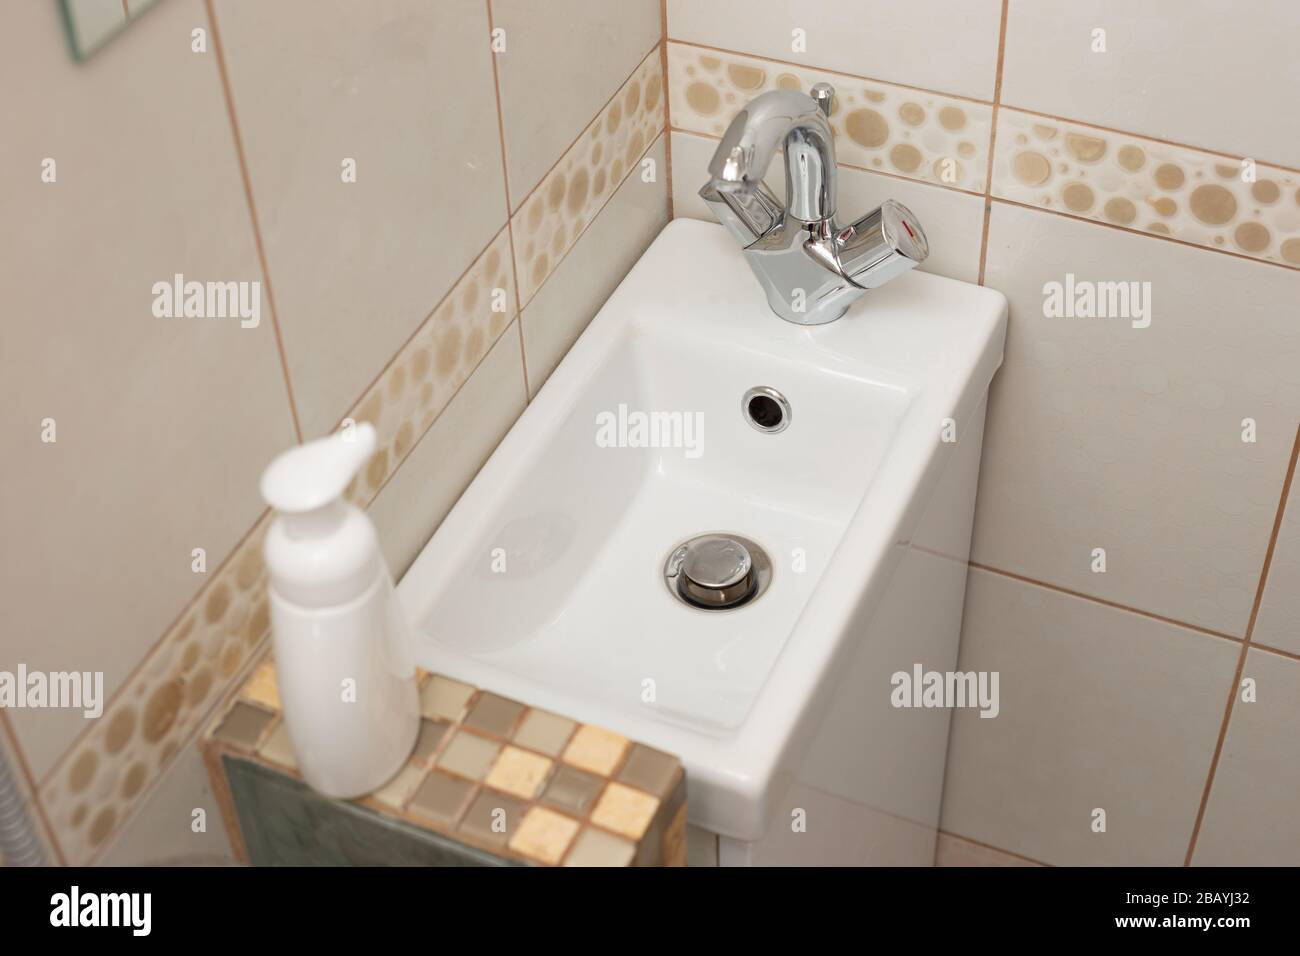 Modern Small White Sink In The Small Bathroom Minimalism Stock Photo Alamy